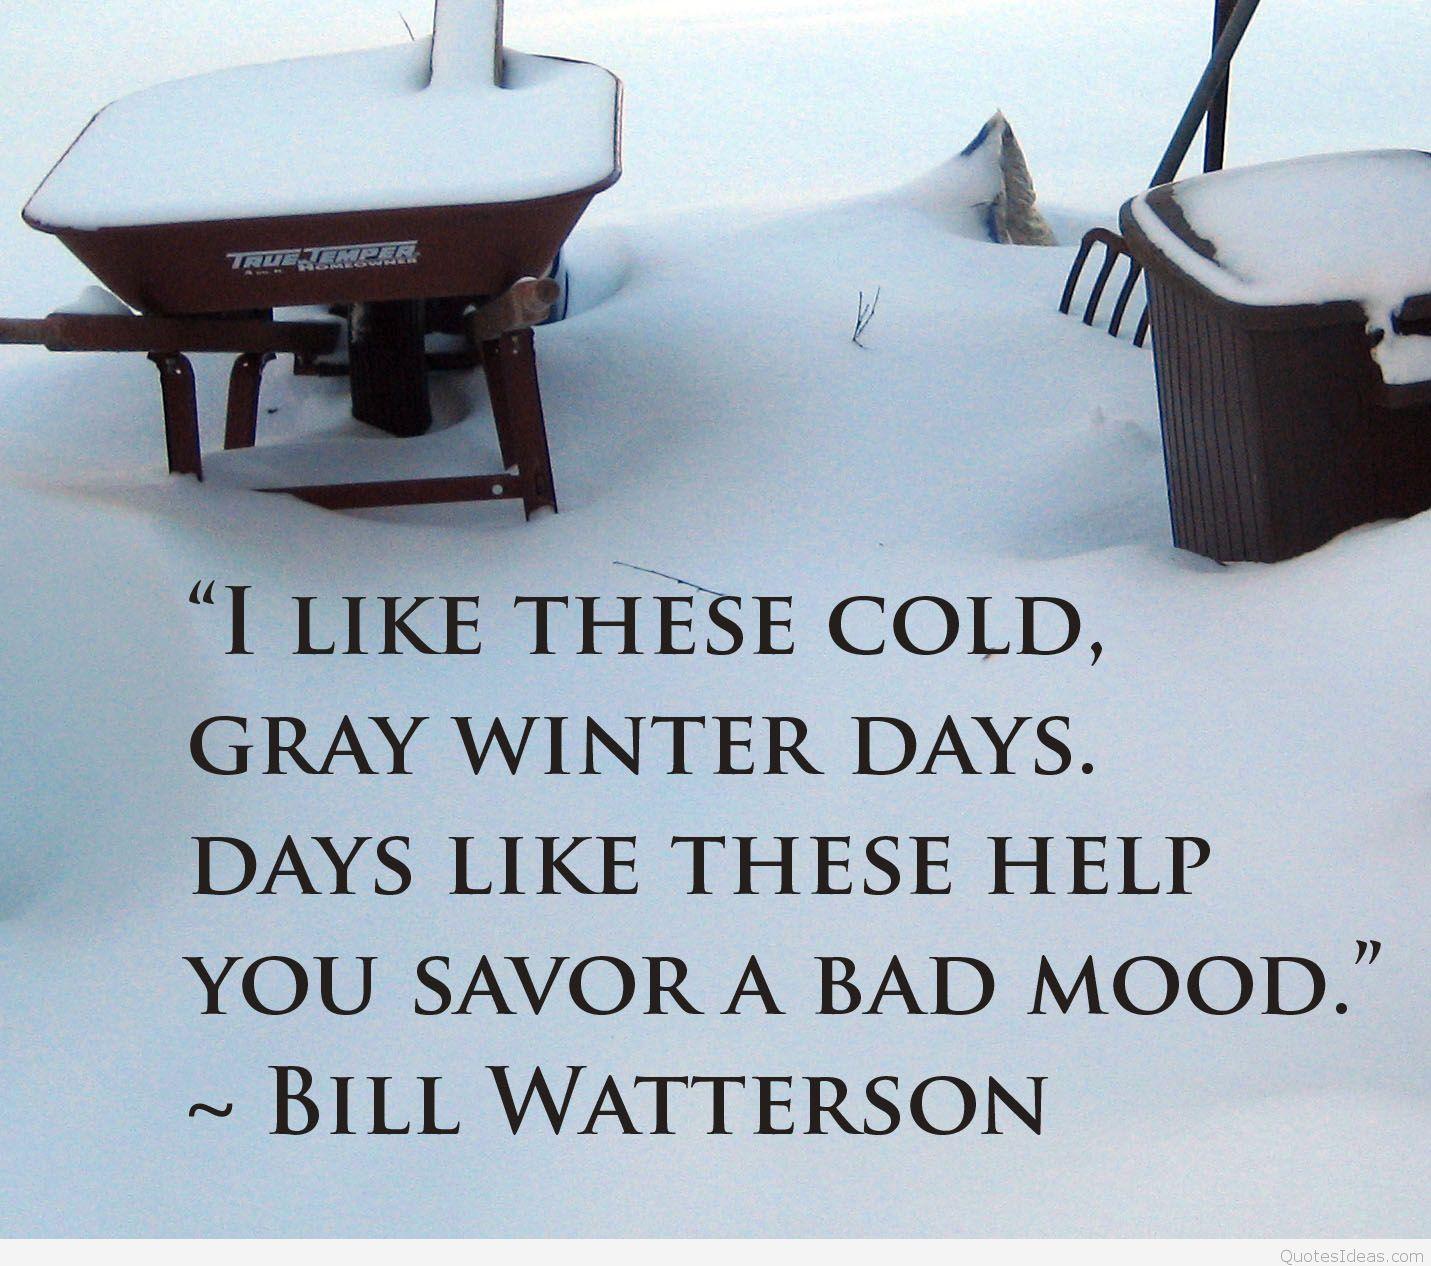 Best Snow Winter Quotes and Sayings image wallpaper